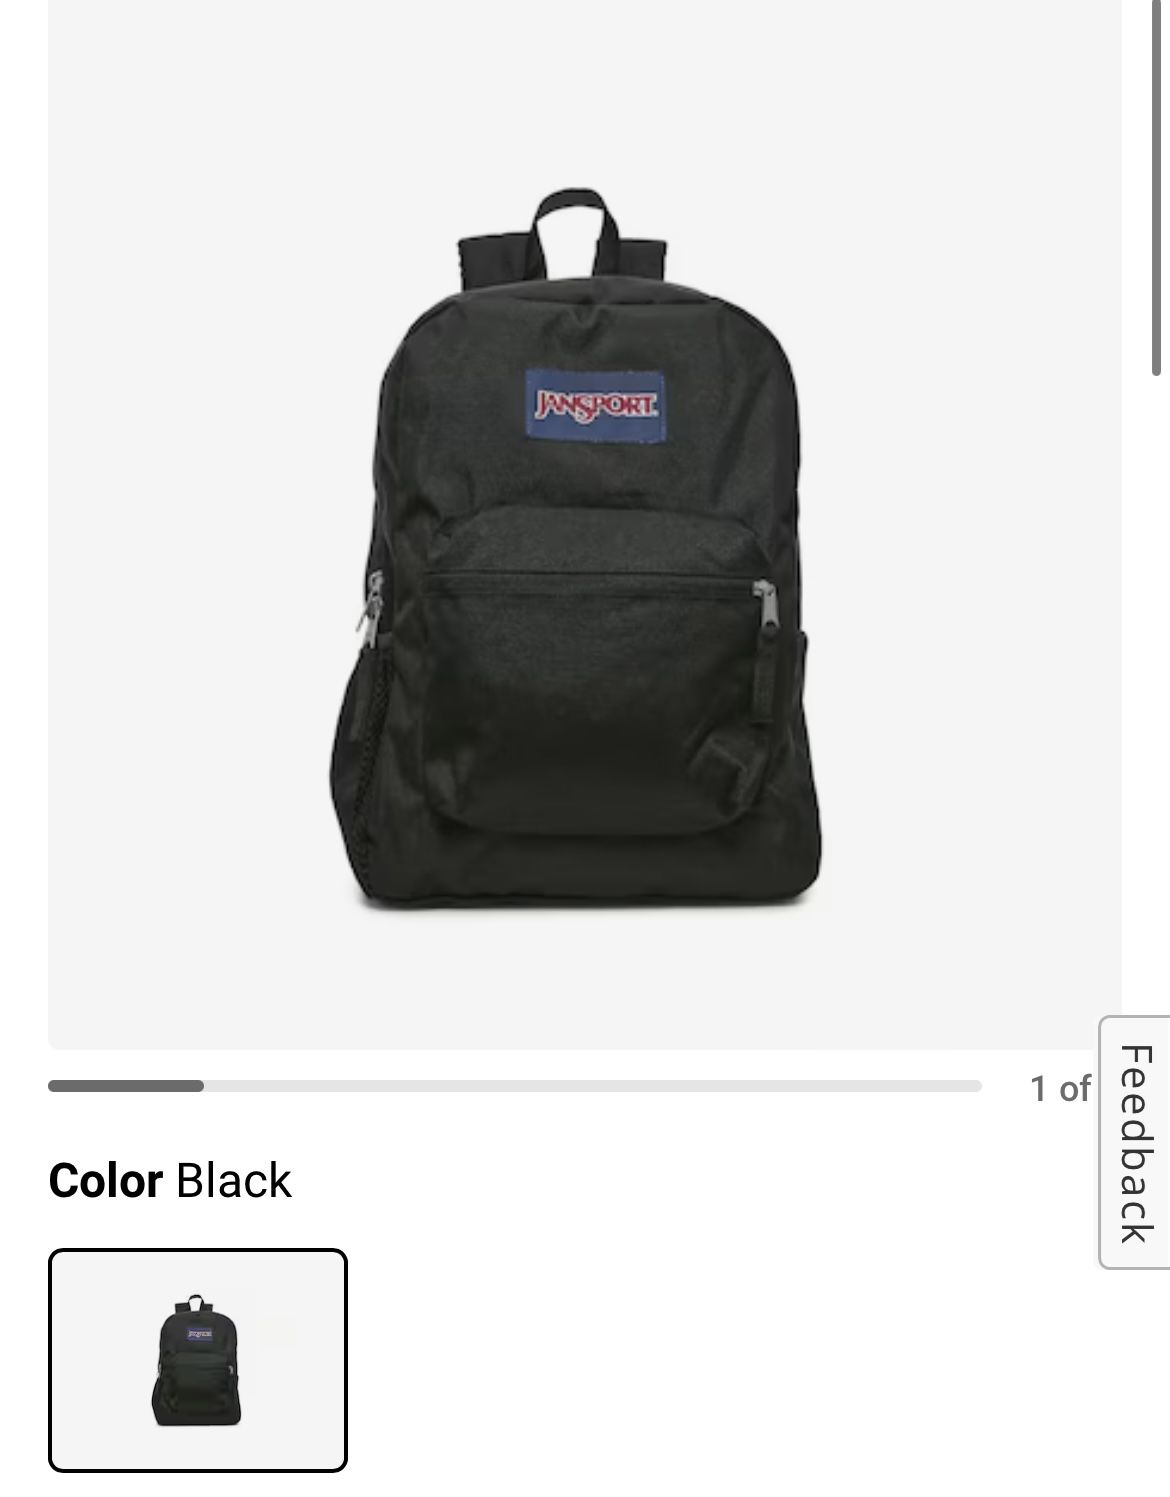 Jansport Crosstown Backpack - NEW WITH TAGS